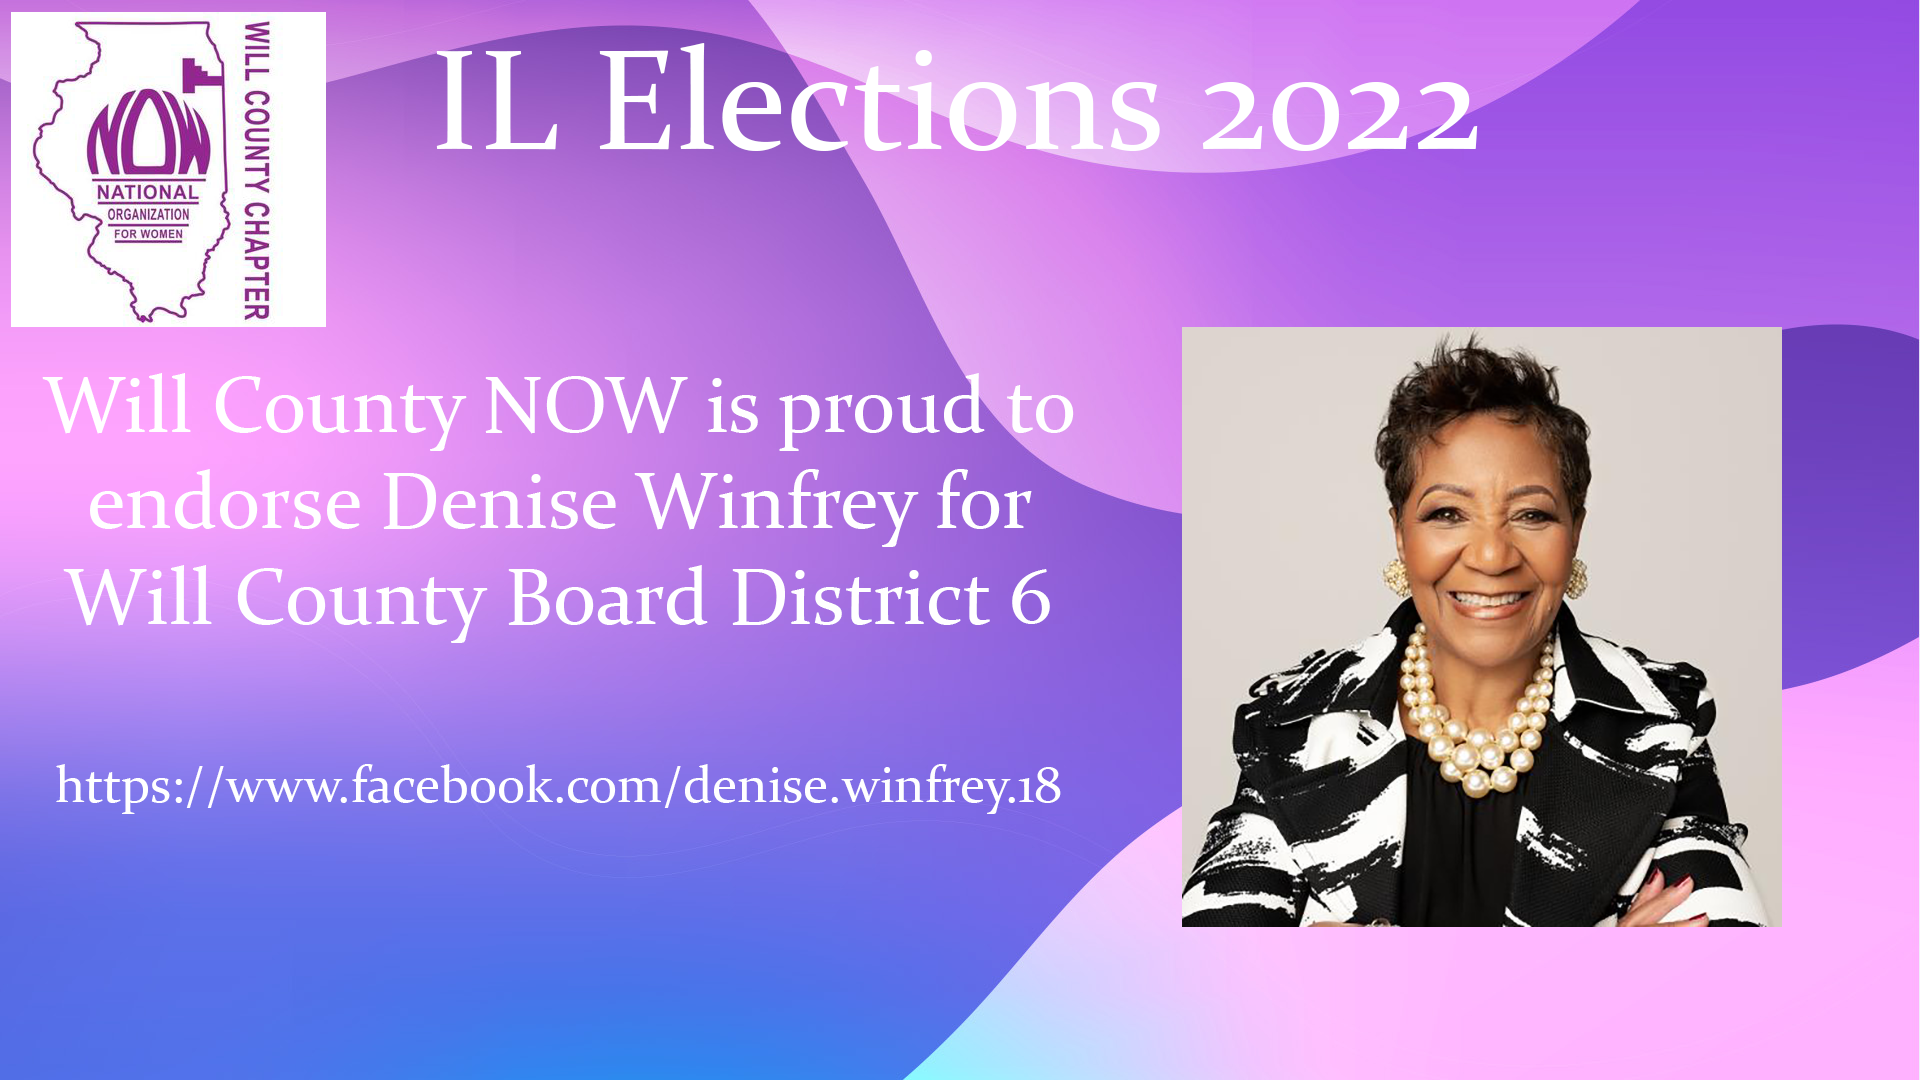 Will County NOW Endorses Denise Winfrey for Will County Board District 6